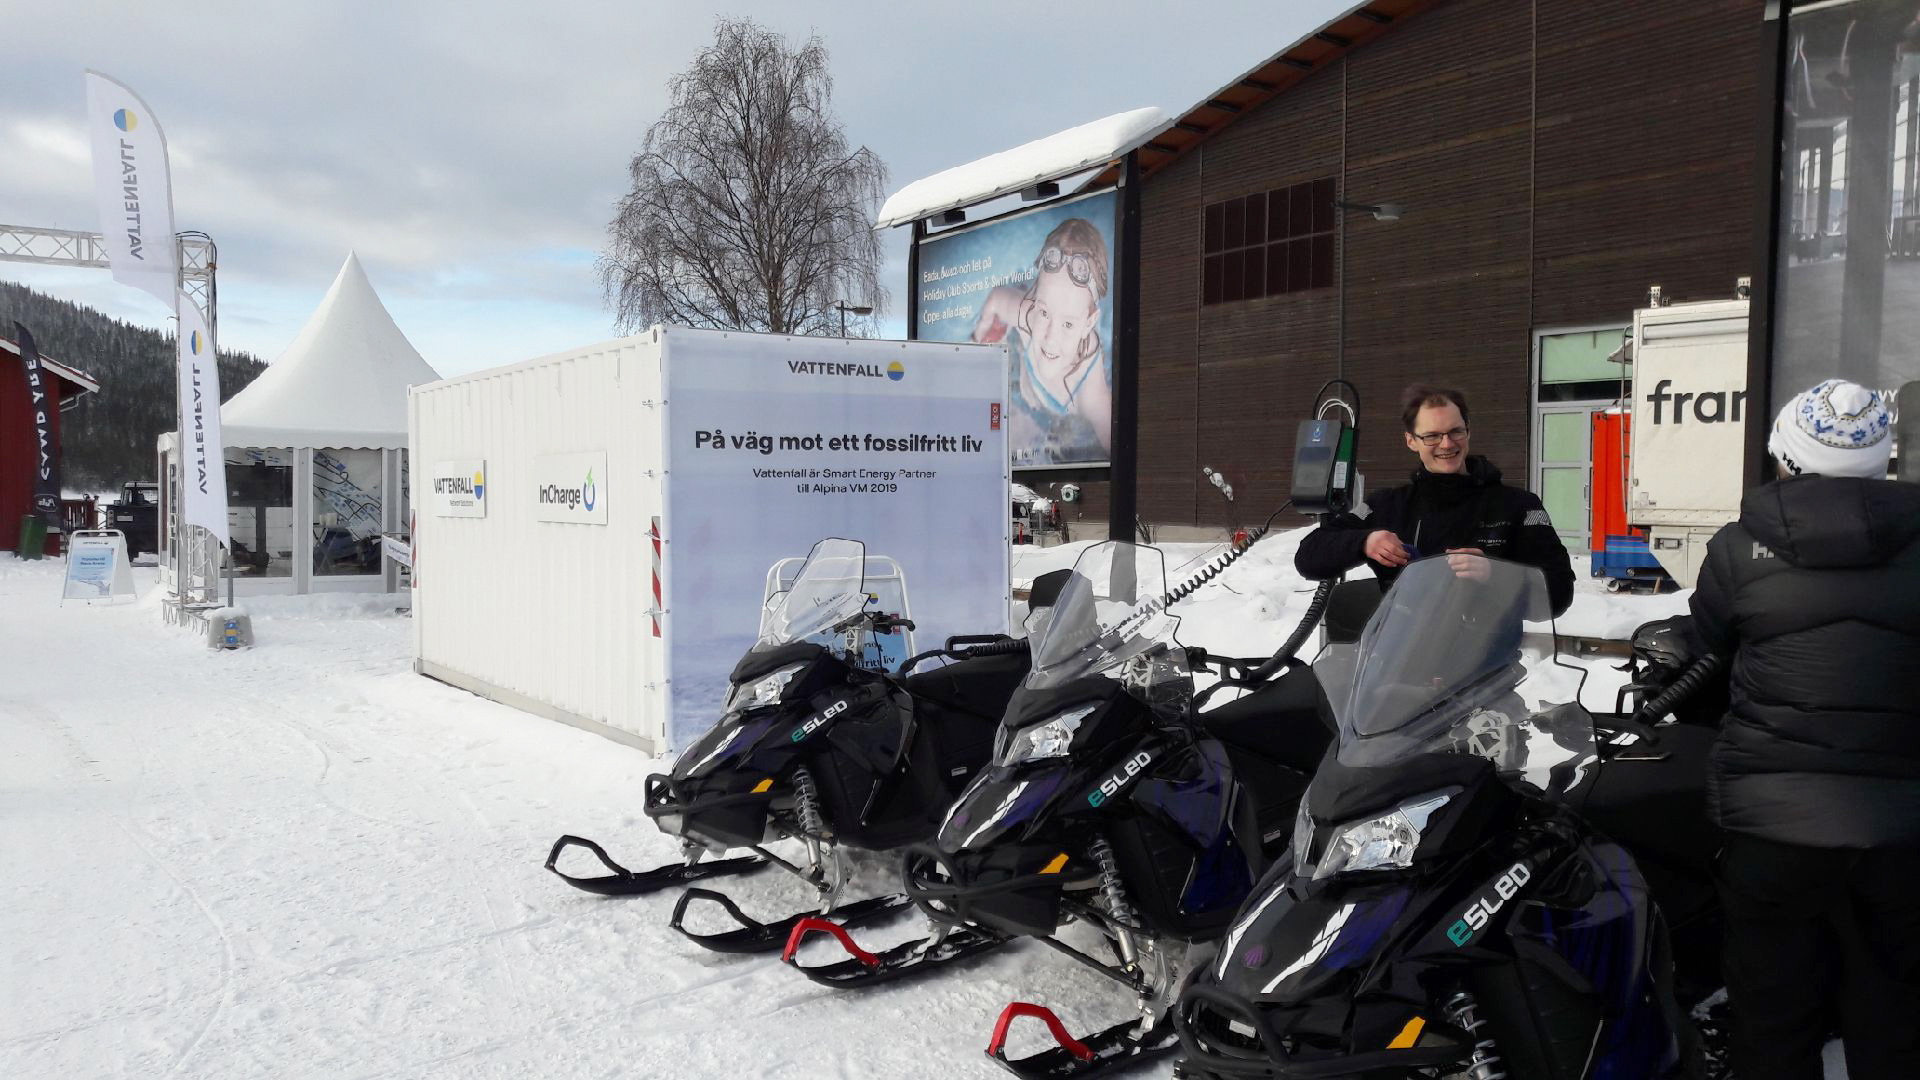 Mobile battery storage system deployed in Are, Sweden